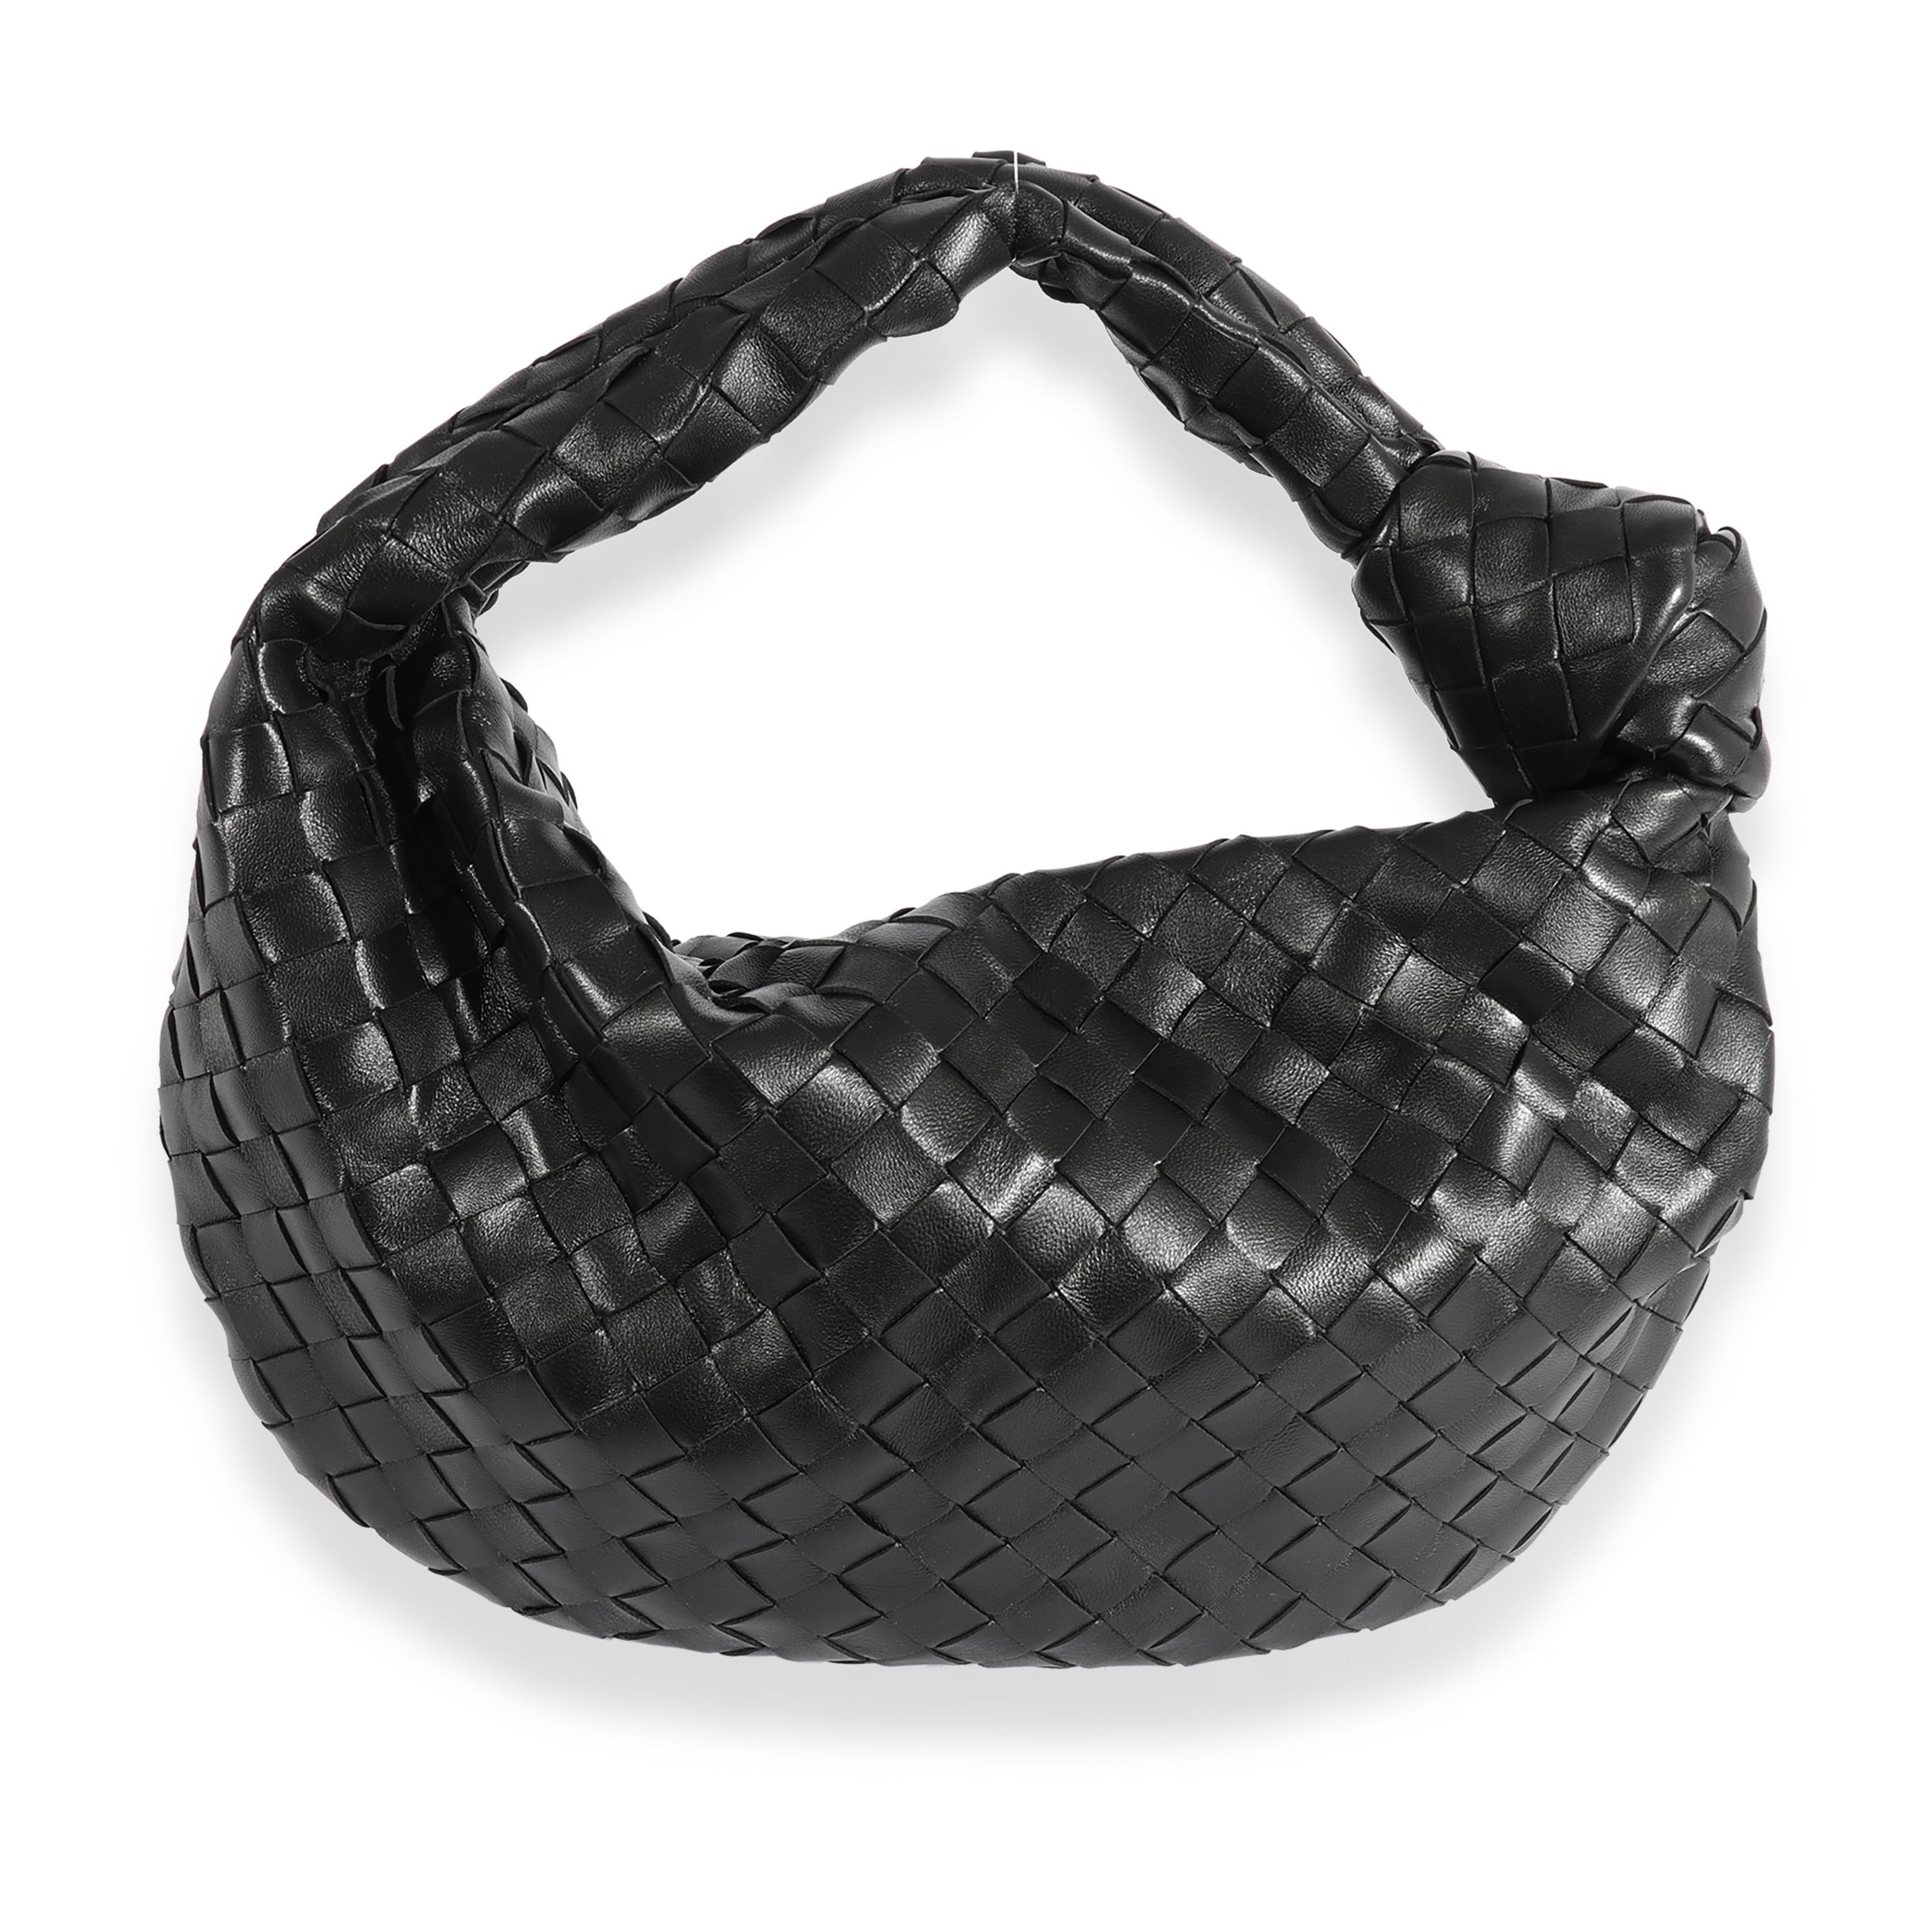 Listing Title: Bottega Veneta Black Intrecciato Leather Teen Jodie
SKU: 123376
MSRP: 3200.00
Condition: Pre-owned 
Handbag Condition: Excellent
Condition Comments: Excellent Condition. Light scratching to hardware. No other visible signs of